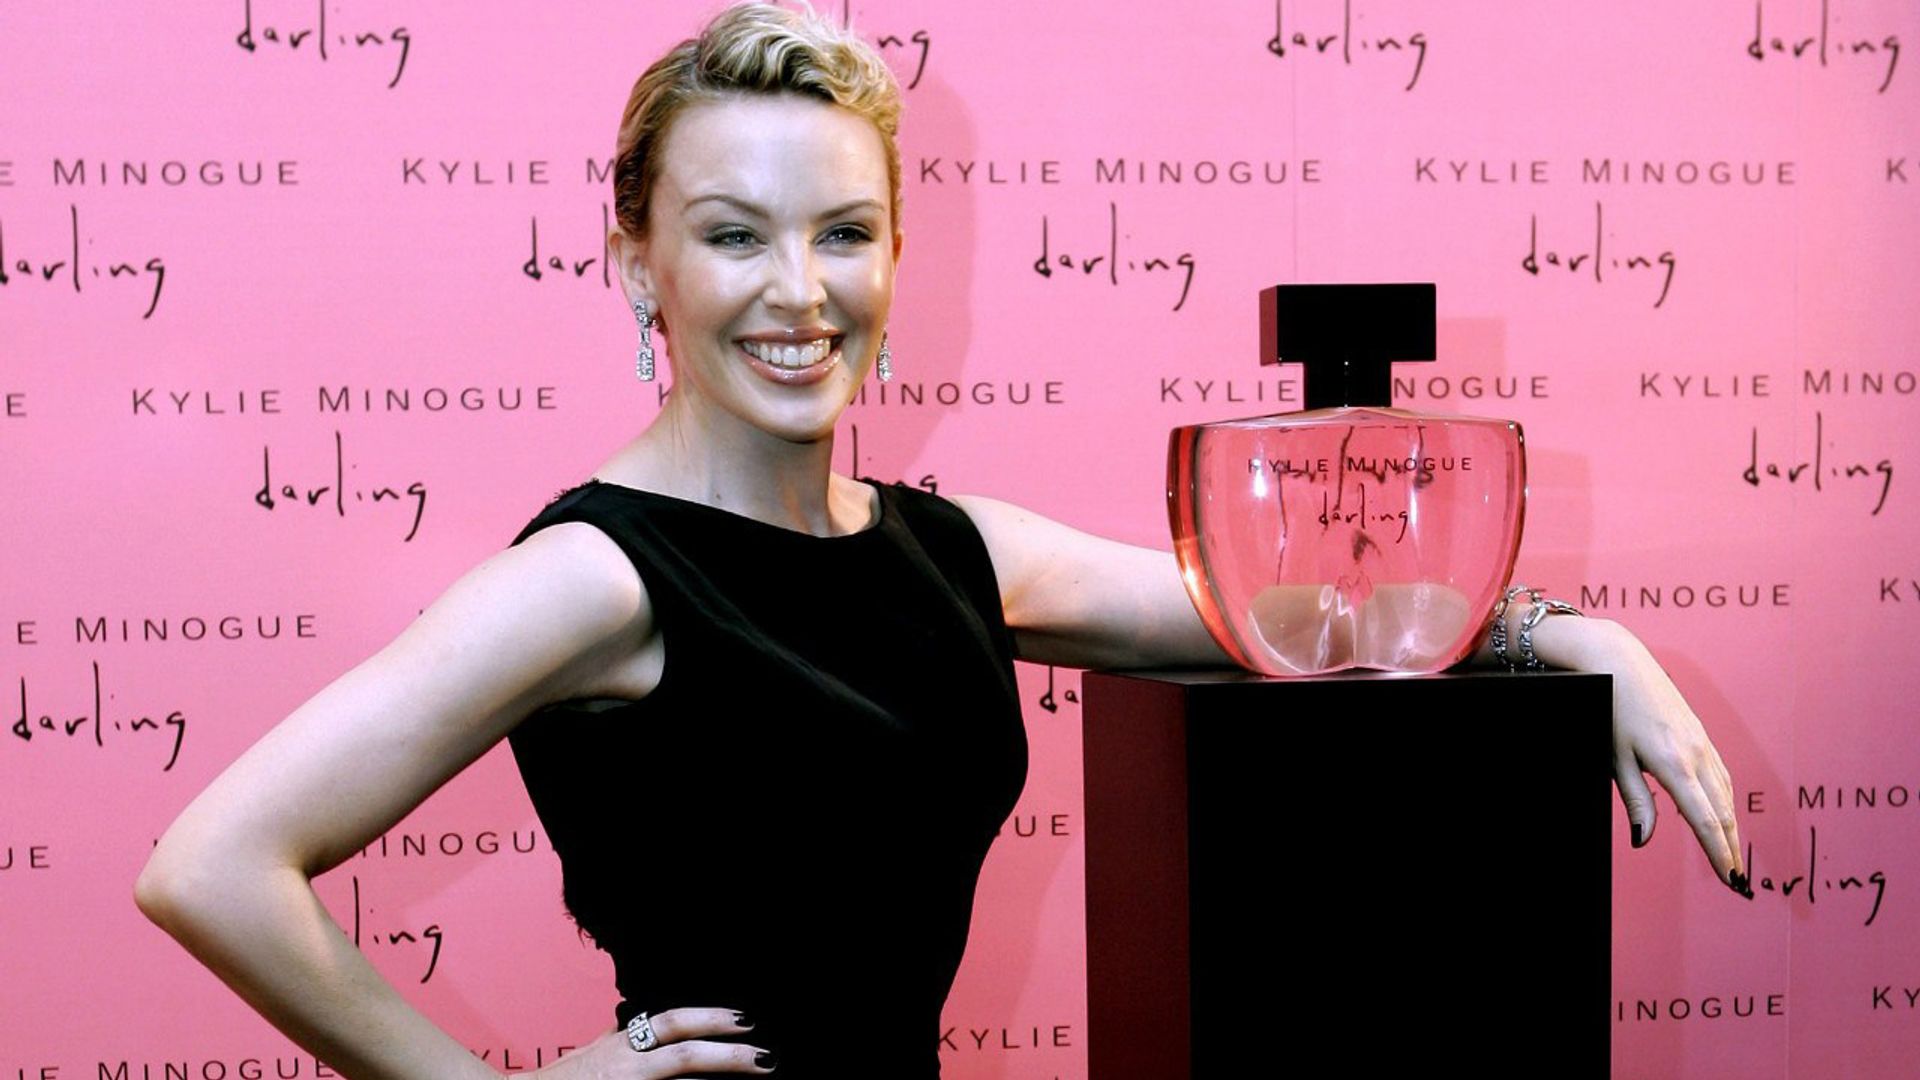 Kylie Minogue on a presentation of her perfume